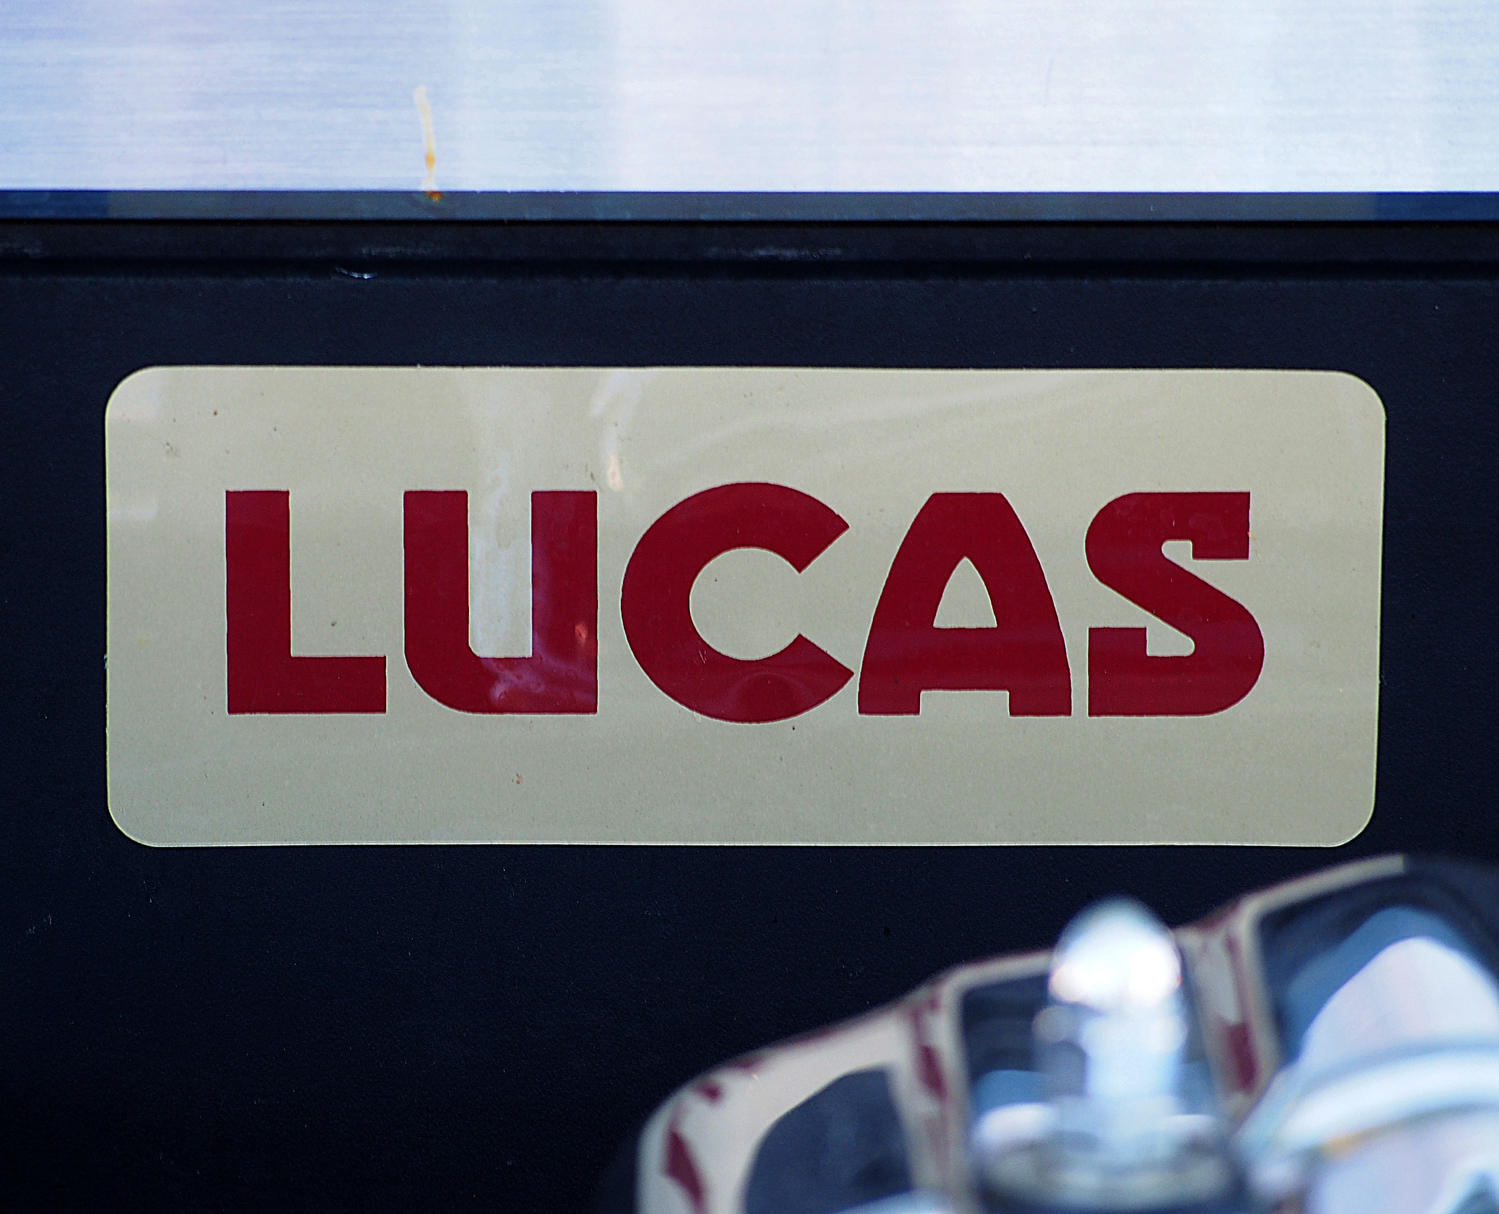 British typography - Lucus (prince of darkness)